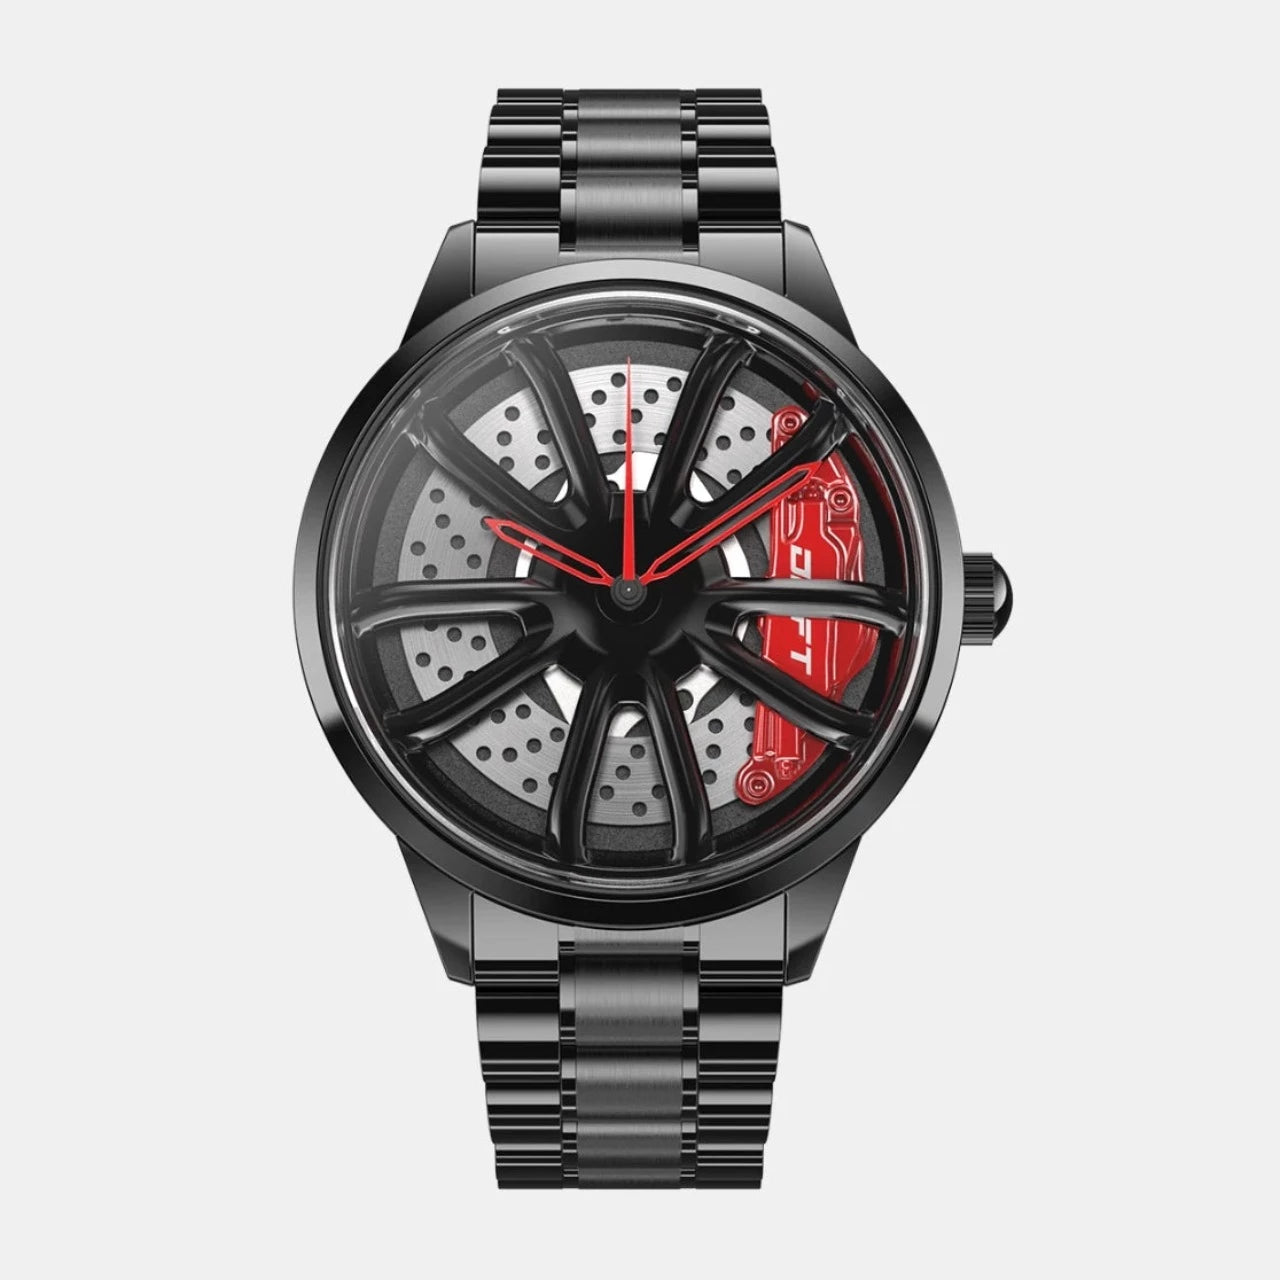 Illuminate your style with our red Performance GT Rim Watch! Crafted by a German startup, these precision watches are tailored for motorsport, tuning, and auto enthusiasts. Ignite your passion! #id_46744365400394